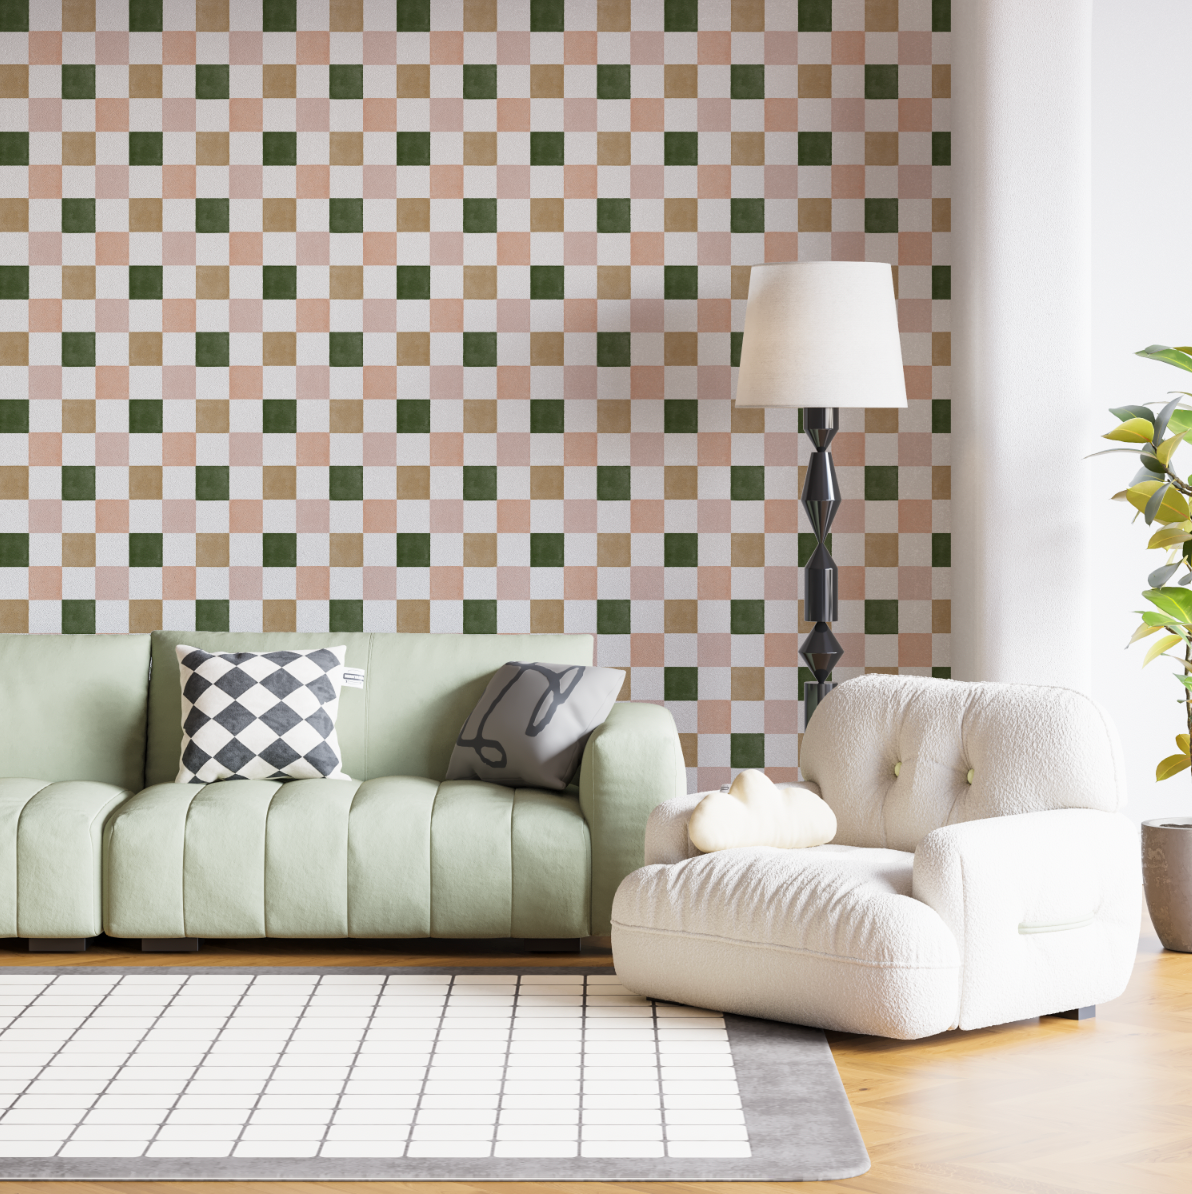 files/Alivingroominfusedwithretrocharmbytheretrocheckeredpeel-and-stickwallpaper.Thepastelgreencouch_whitearmchair_andstandinglampaddwarmthandpersonalitytothespace_whilethewallpaper_swhimsi.png